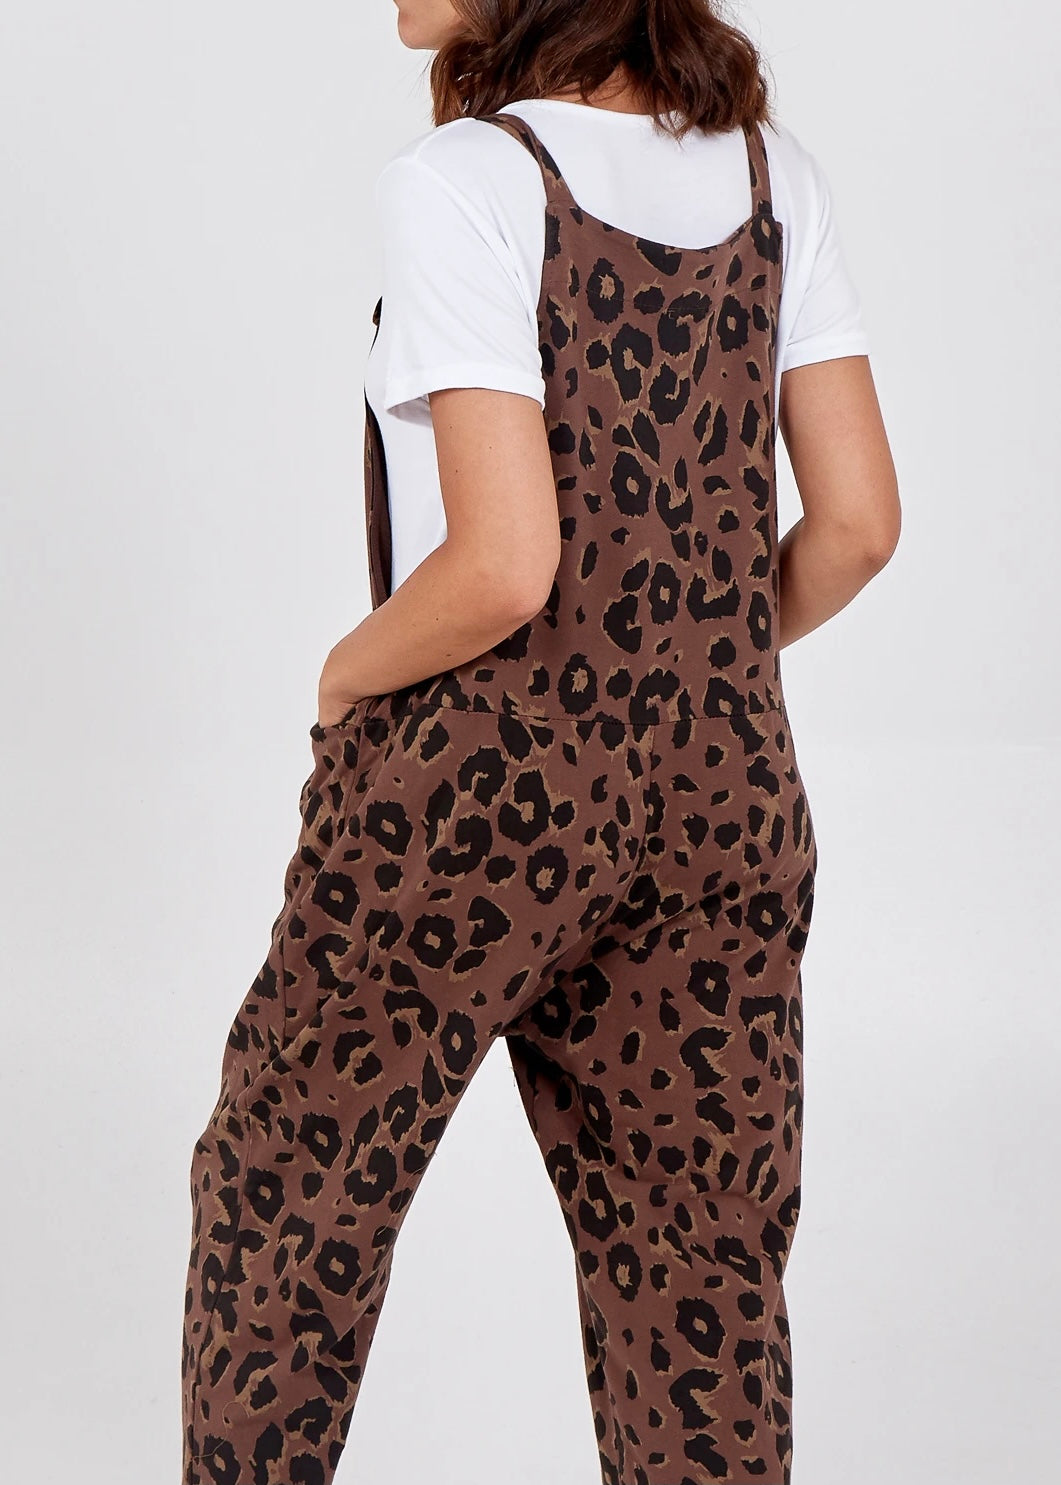 Showing the back of the Porthleven Dungarees in brown with a leopard print pattern 